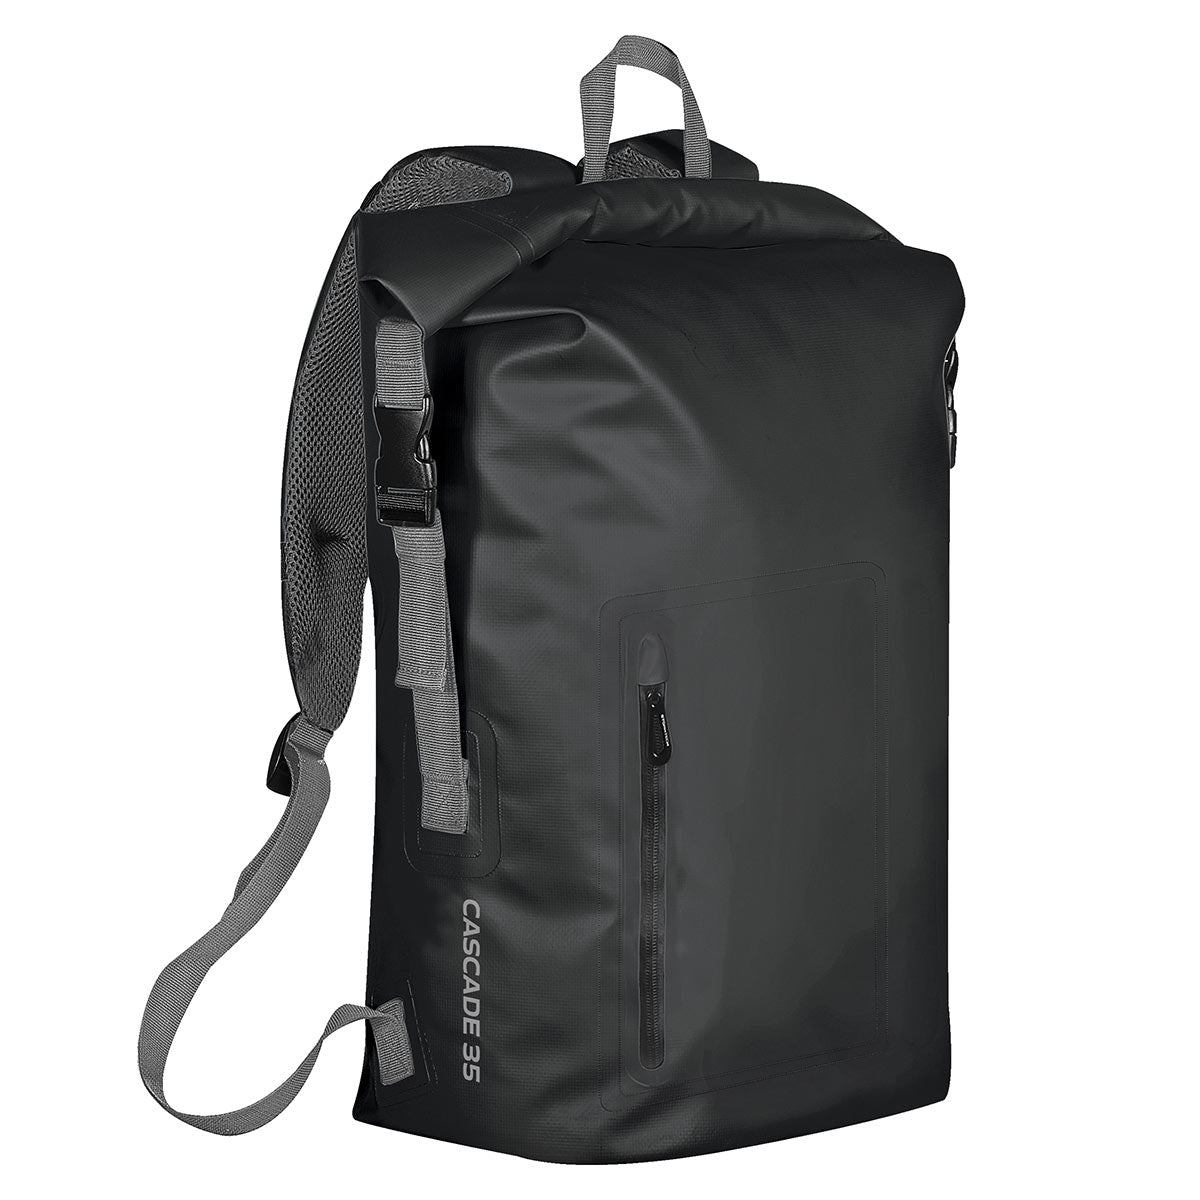 Nomad Backpack - Stormtech Canada Retail